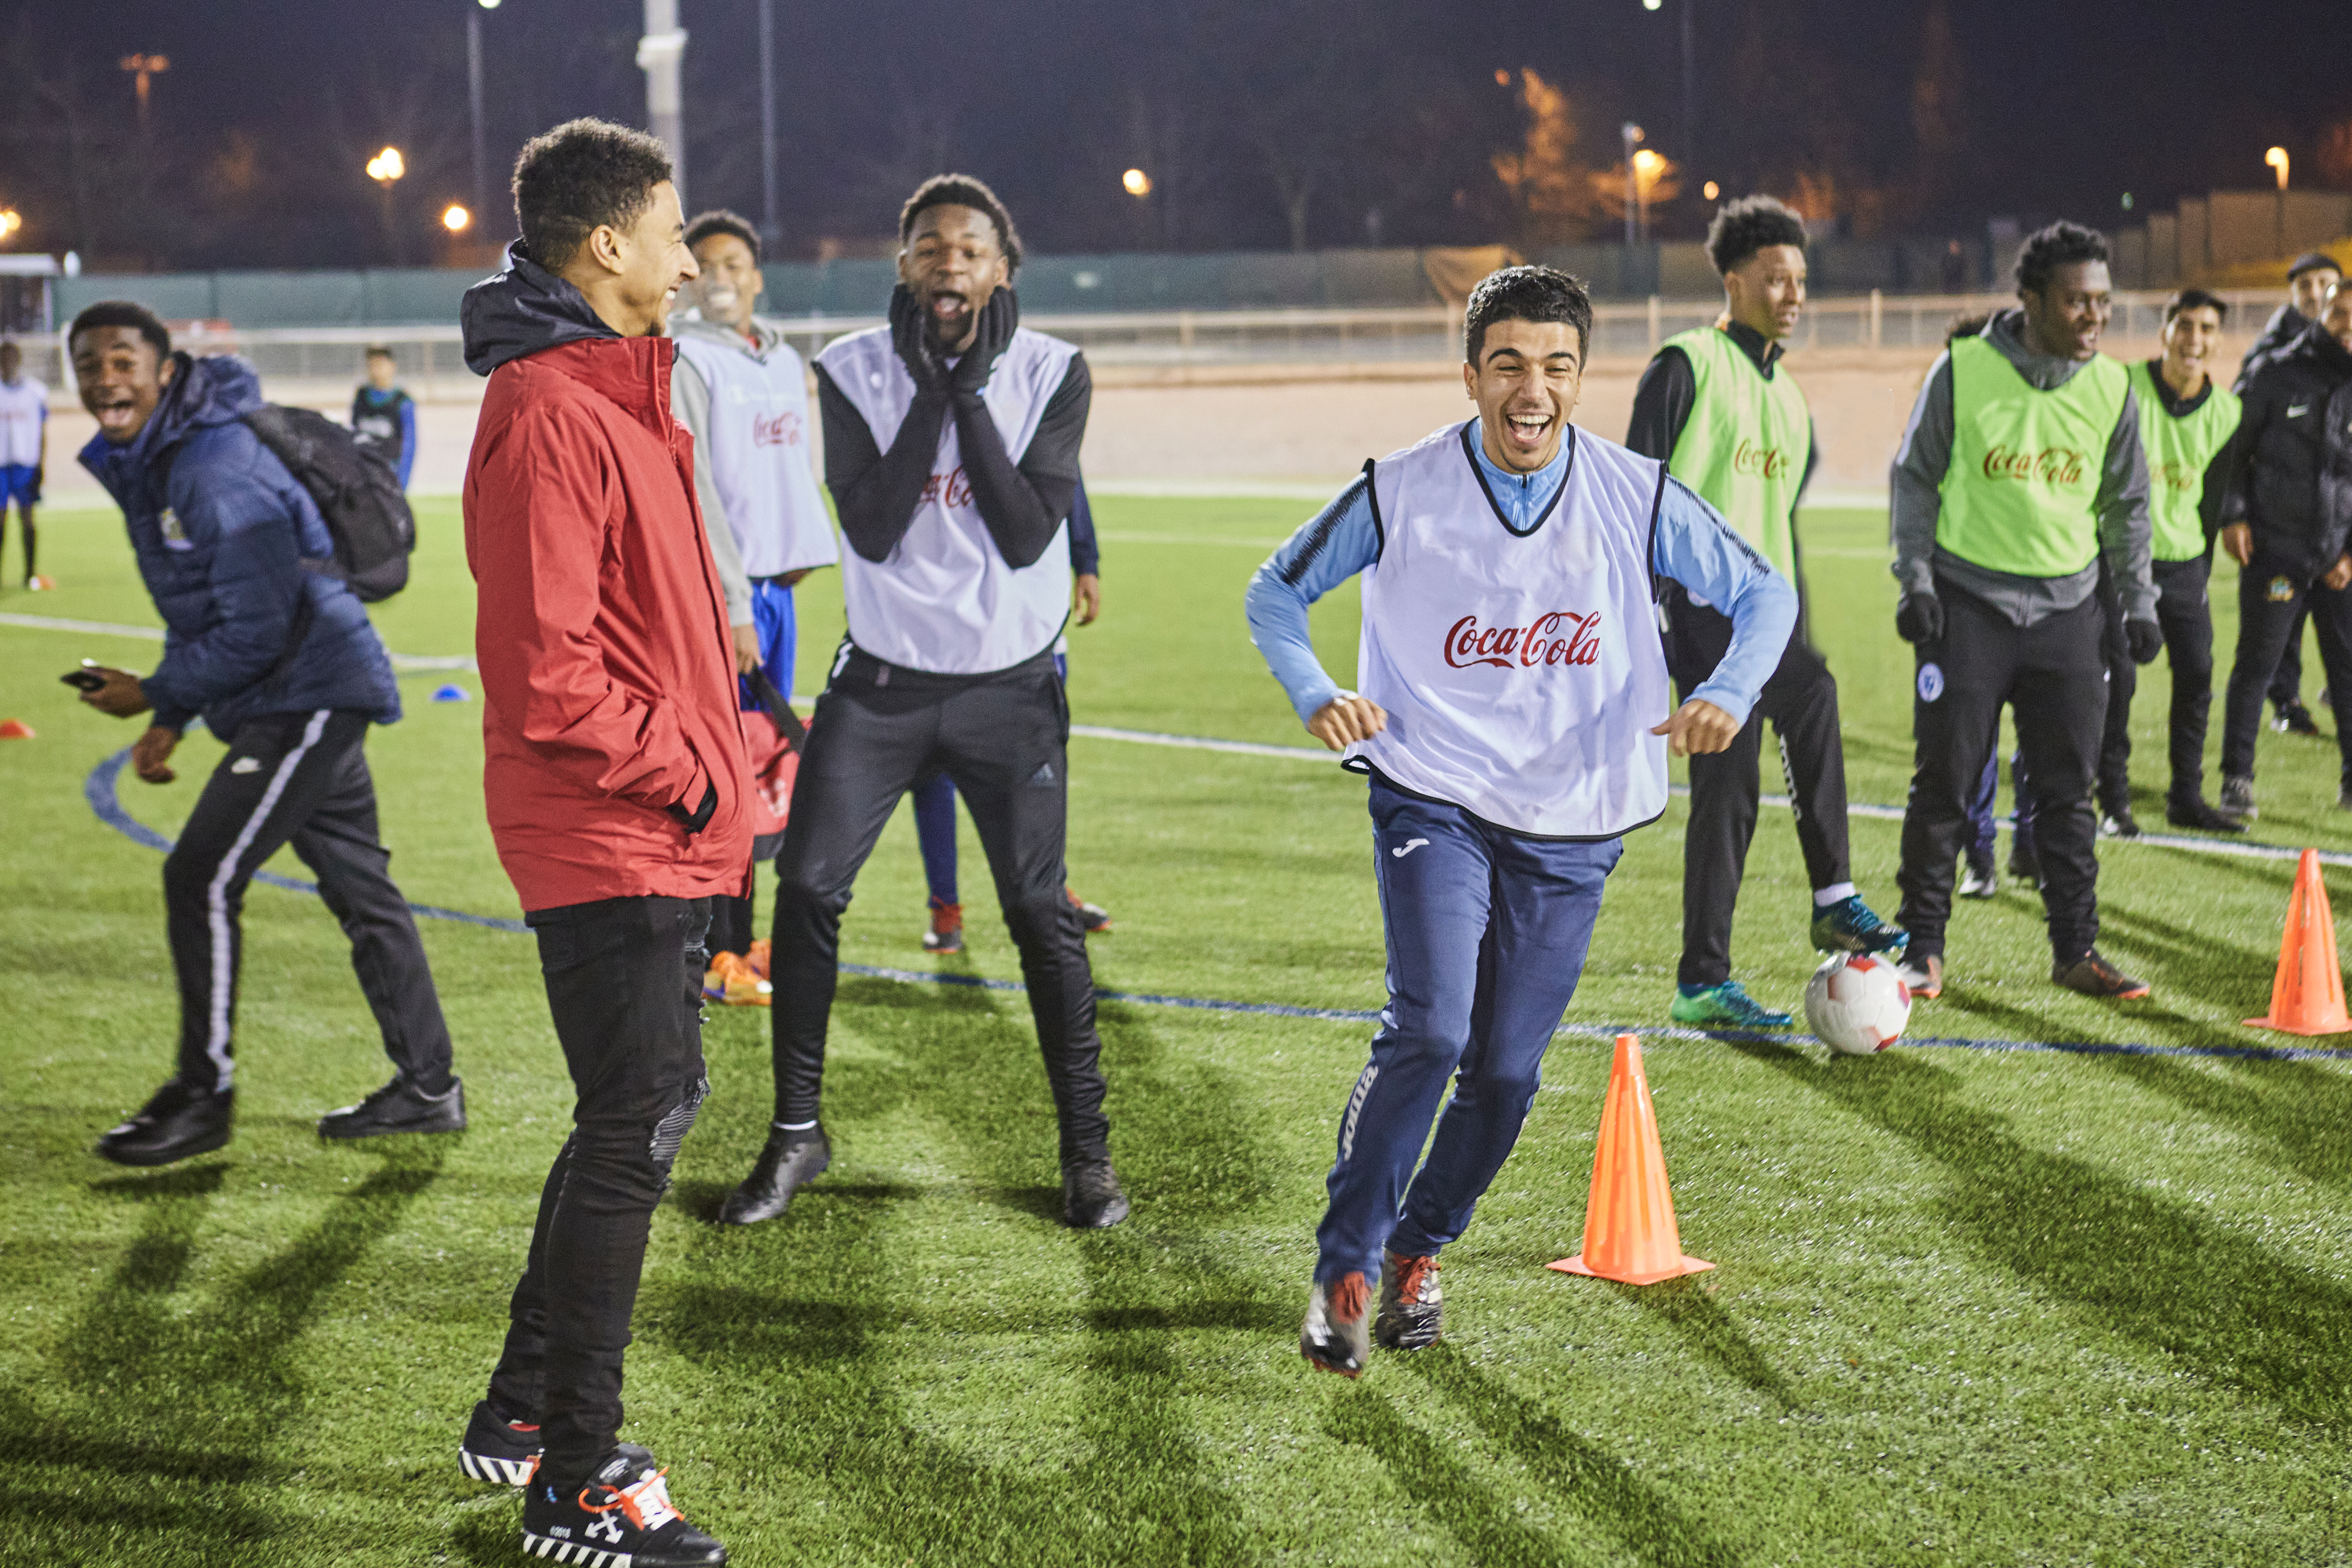 Coca-Cola ambassador Jesse Lingard takes part in a training session with StreetGames players in Manchester